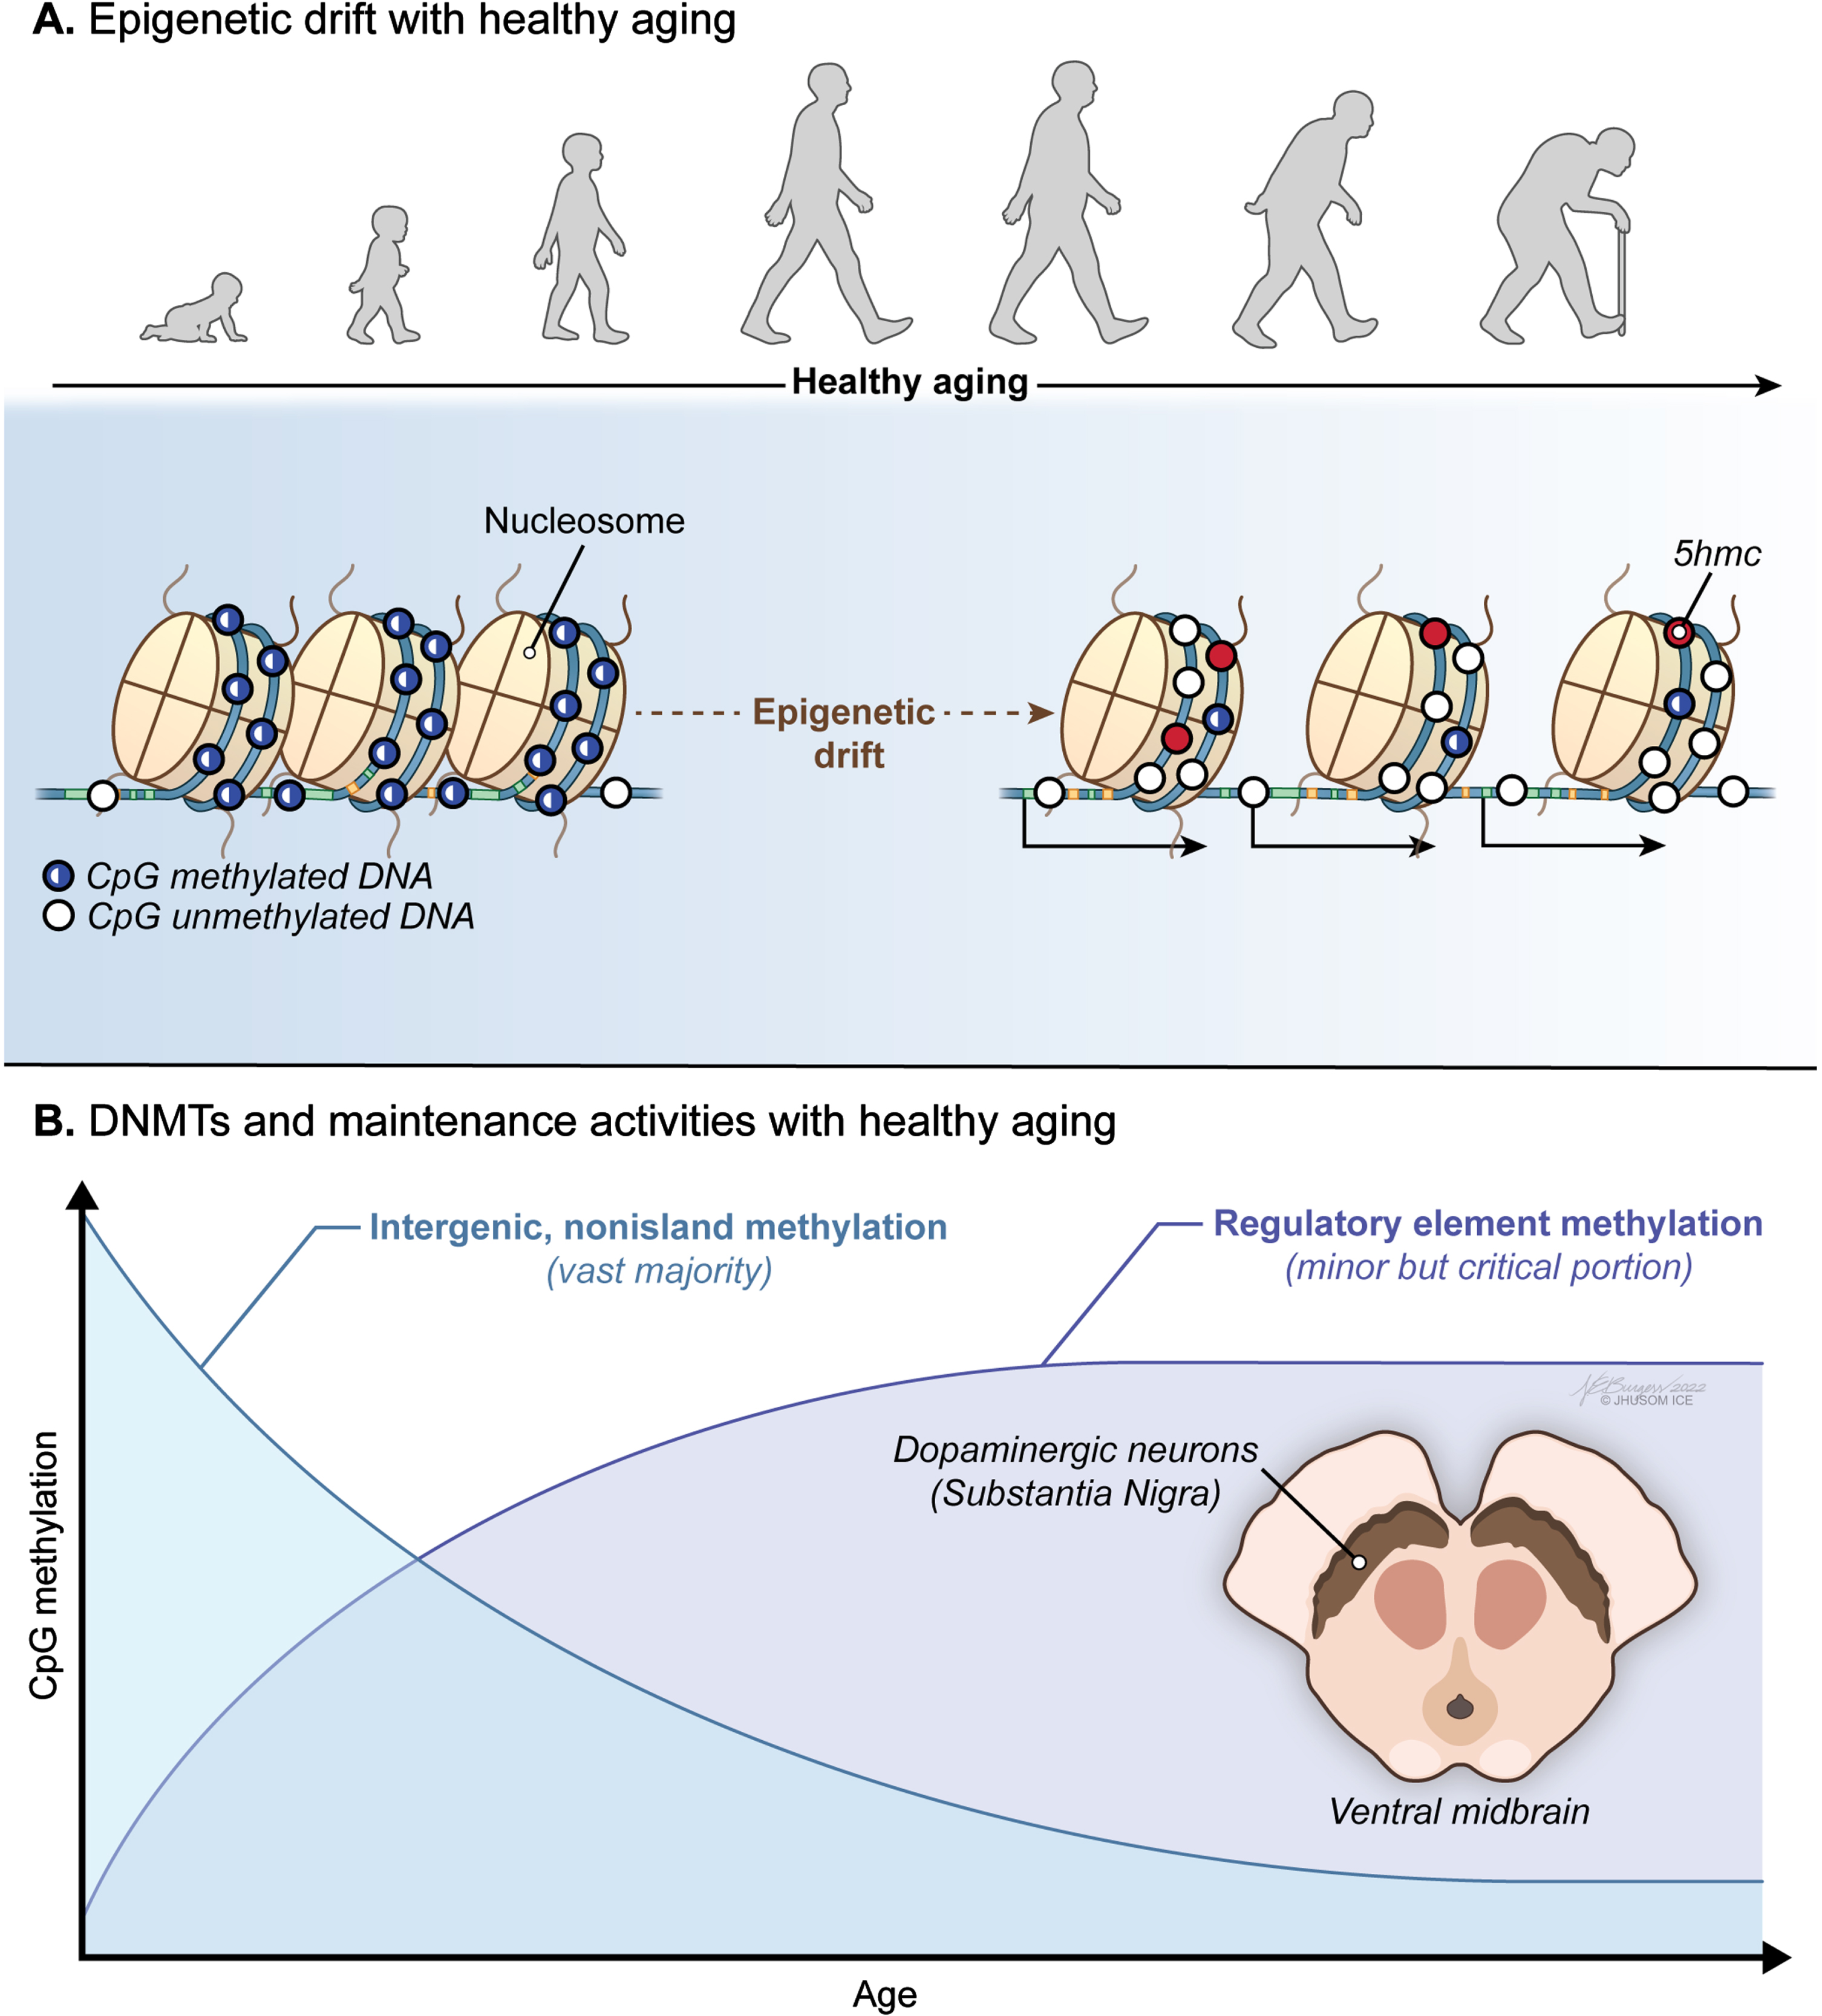 Age-associated trends in DNA methylome of the brain. A) A progressive loss of original epigenetic configurations, also called “epigenetic drift”, is observed during healthy aging. B) A global pattern of DNA hypomethylation with many promoters undergoing aberrant hypermethylation appears to be a hallmark of the aging brain independent of the Parkinson’s disease (PD)-associated neurodegeneration.